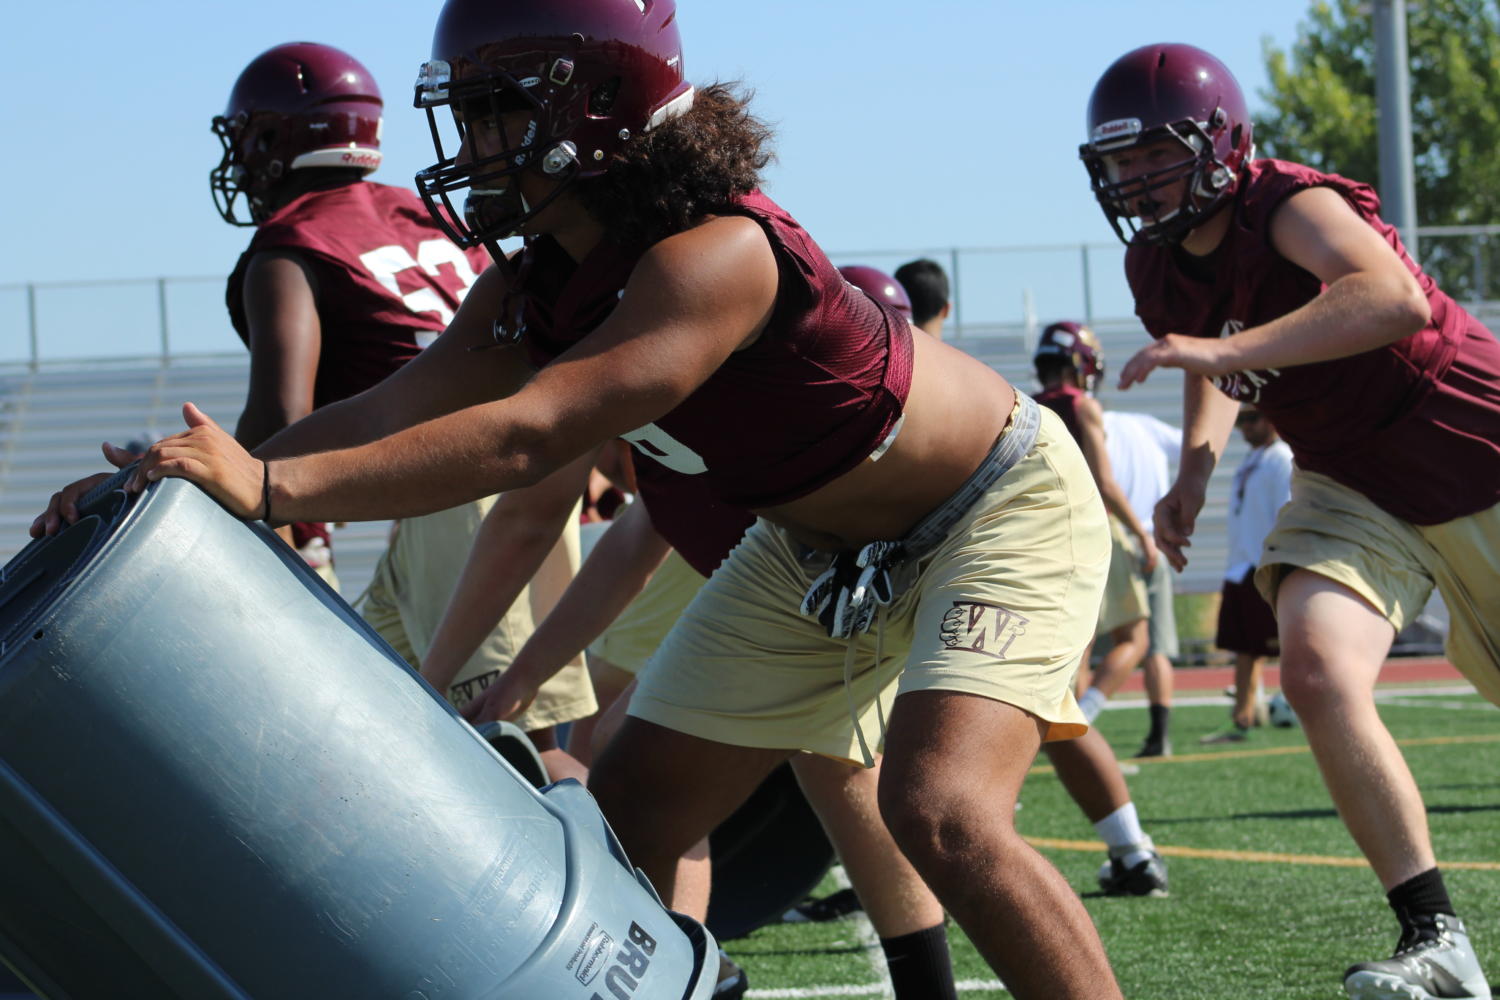 During+varsity+football+practice+on+July+31%2C+Nick+Eaton+practices+a+tackling+drill+with+a+trash+can.+Photo+by+Madilyn+Sindelar.%0A